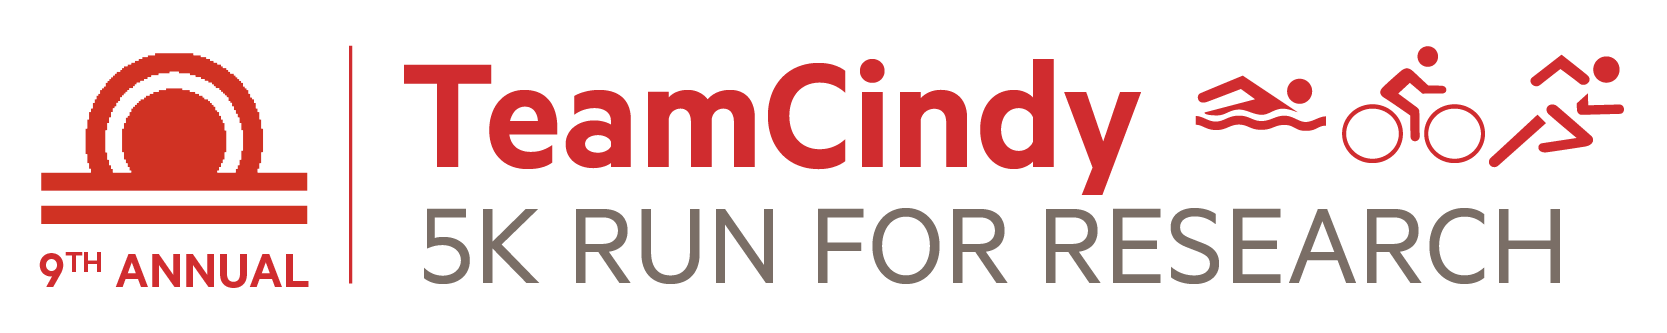 9th annual TeamCindy 5k Run for Research